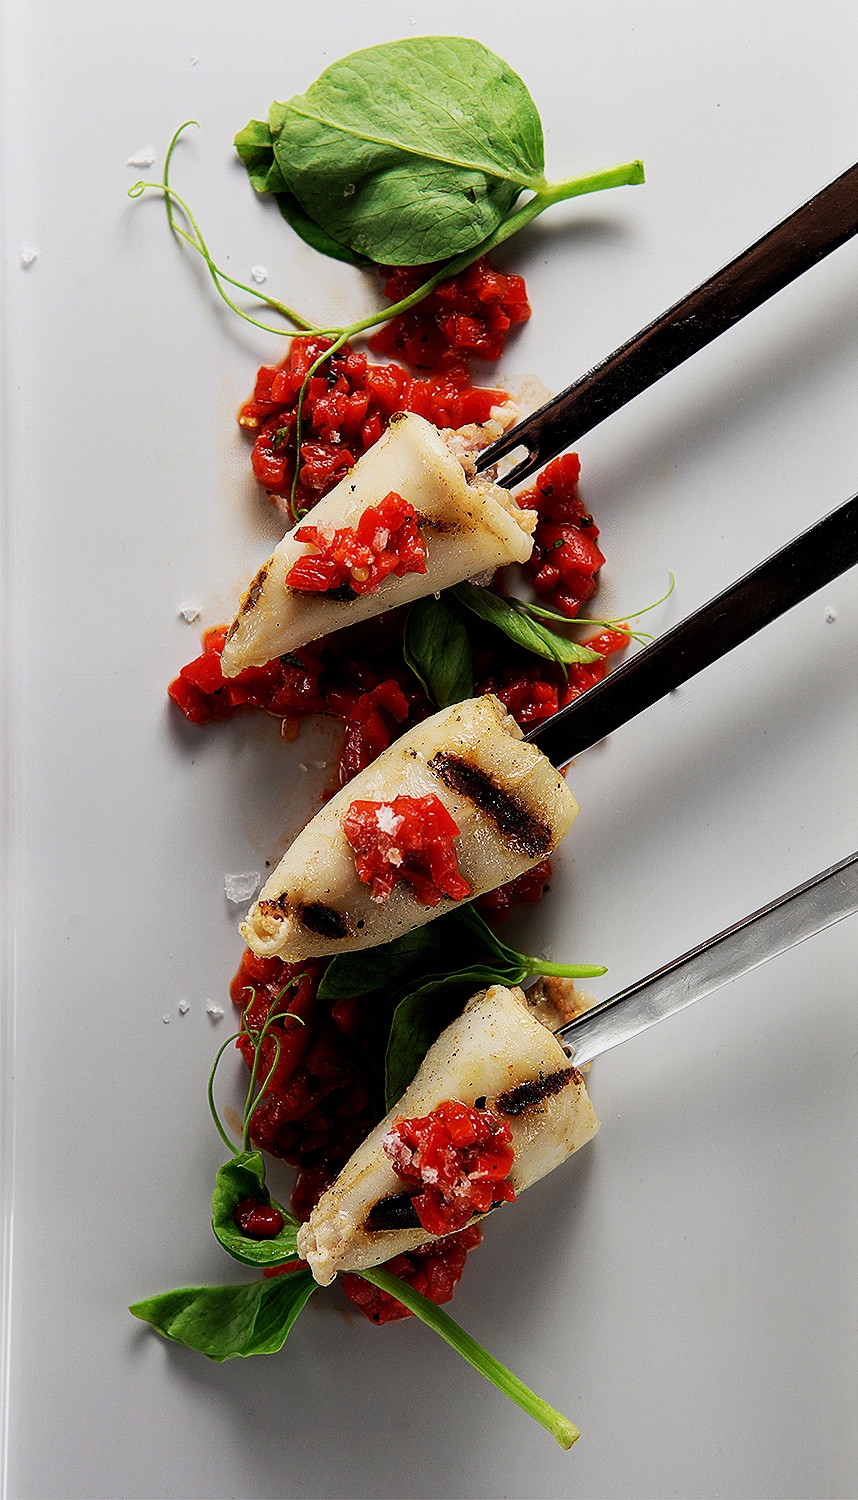 Stuffed squid with red pepper salsa